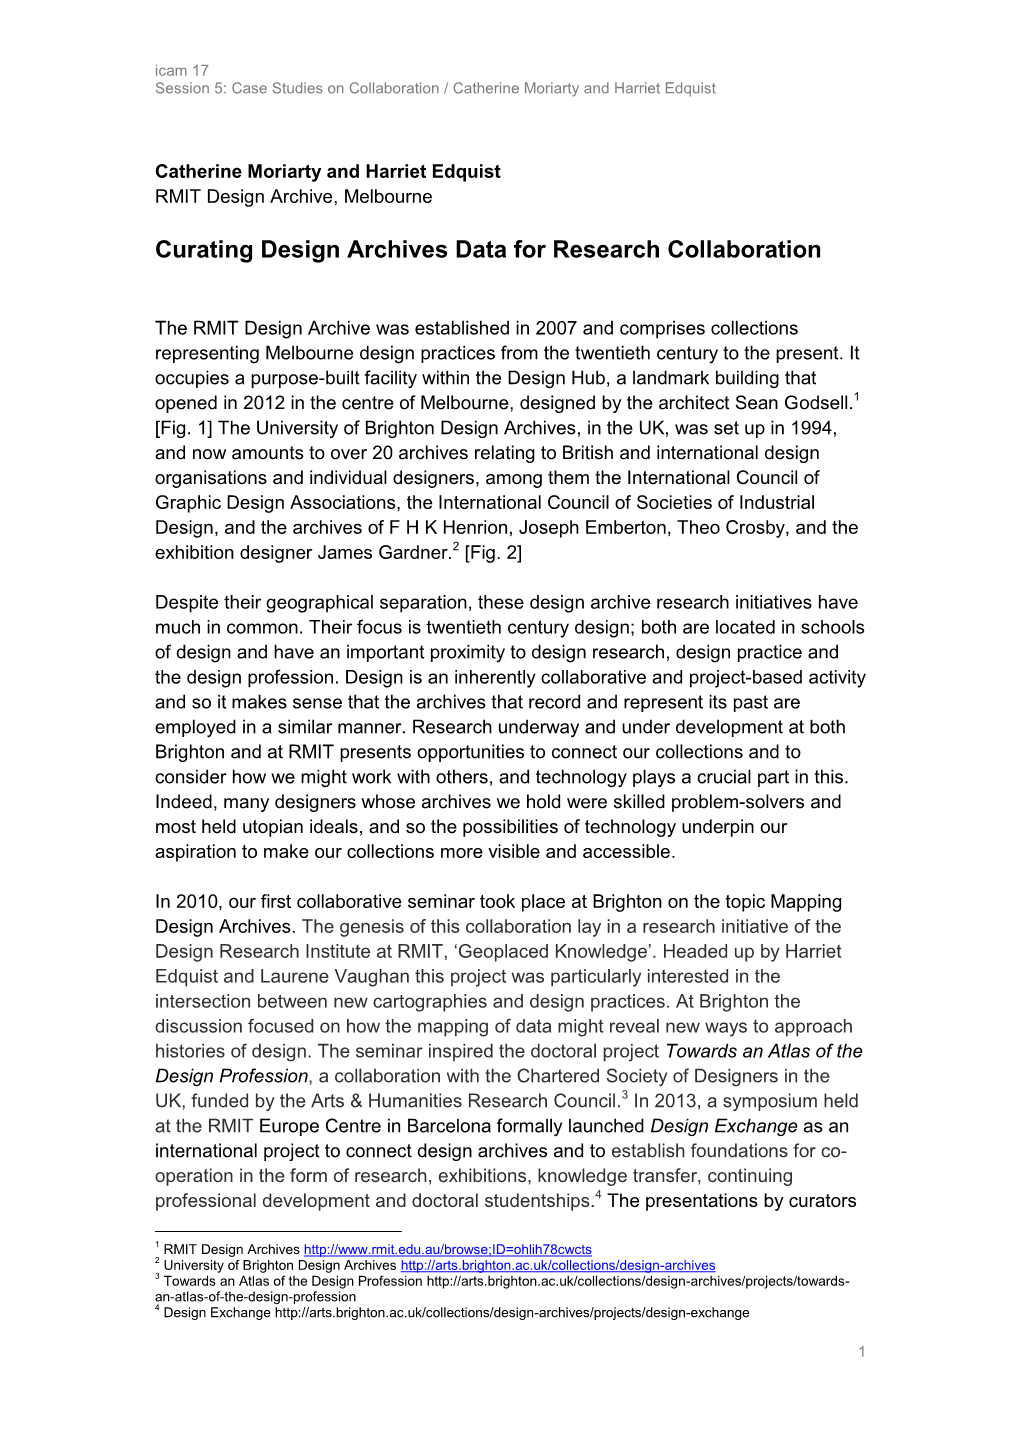 Curating Design Archives Data for Research Collaboration